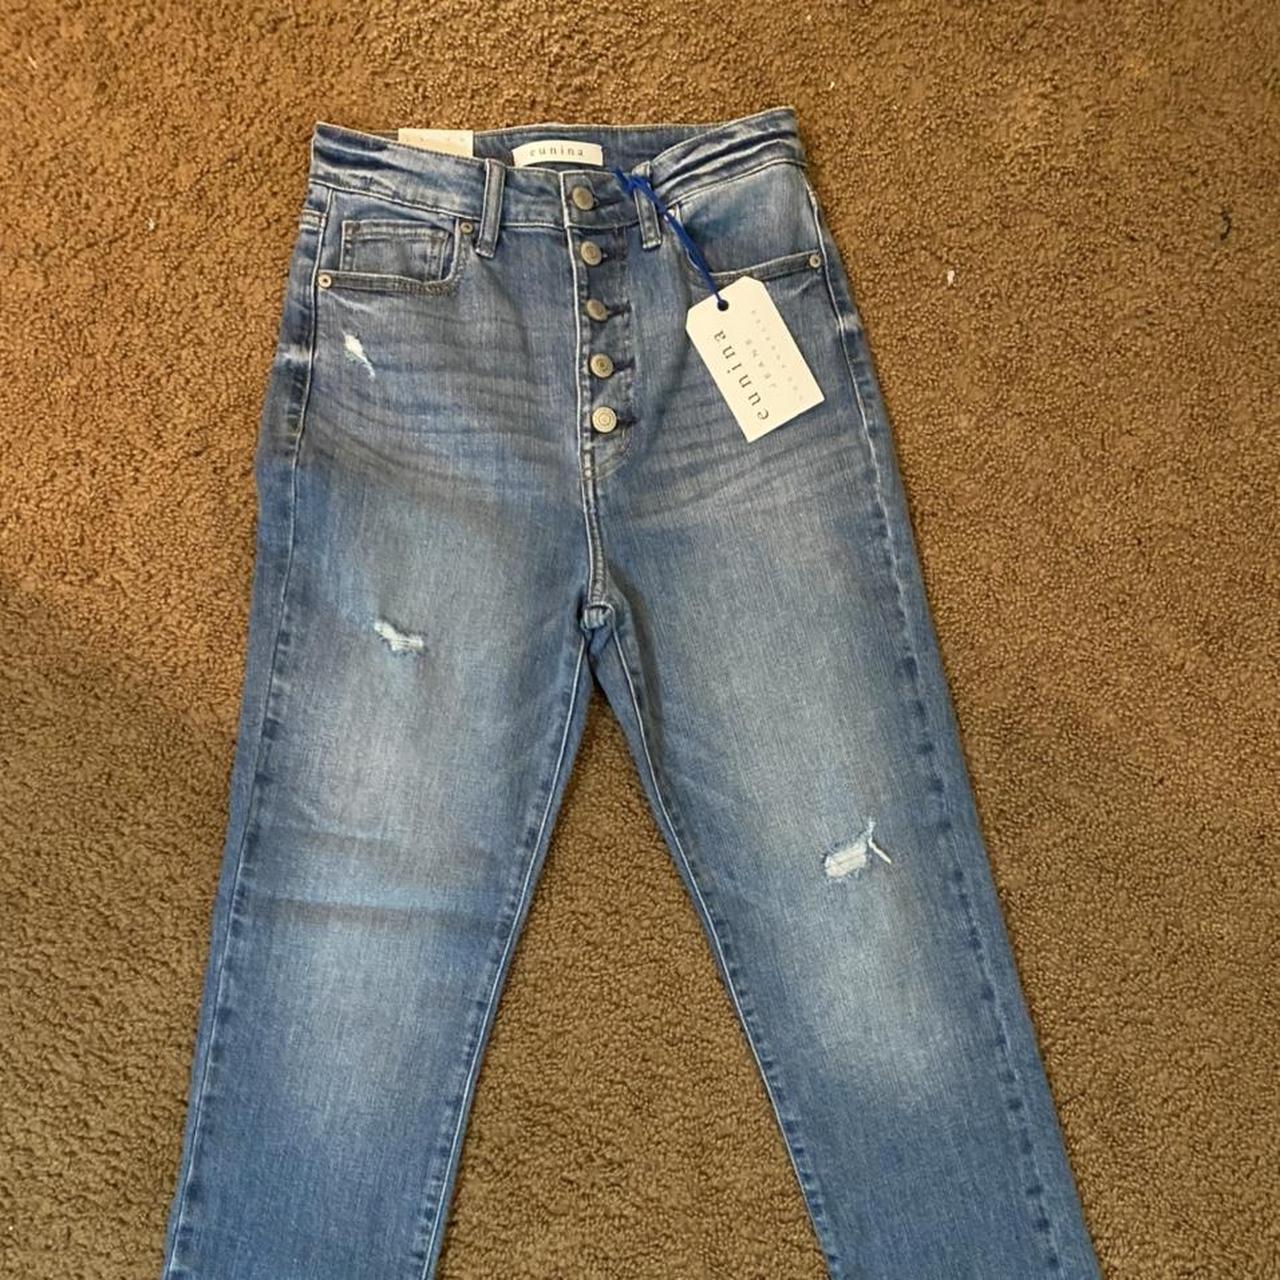 Product Image 4 - Jeans brand new! Bought for